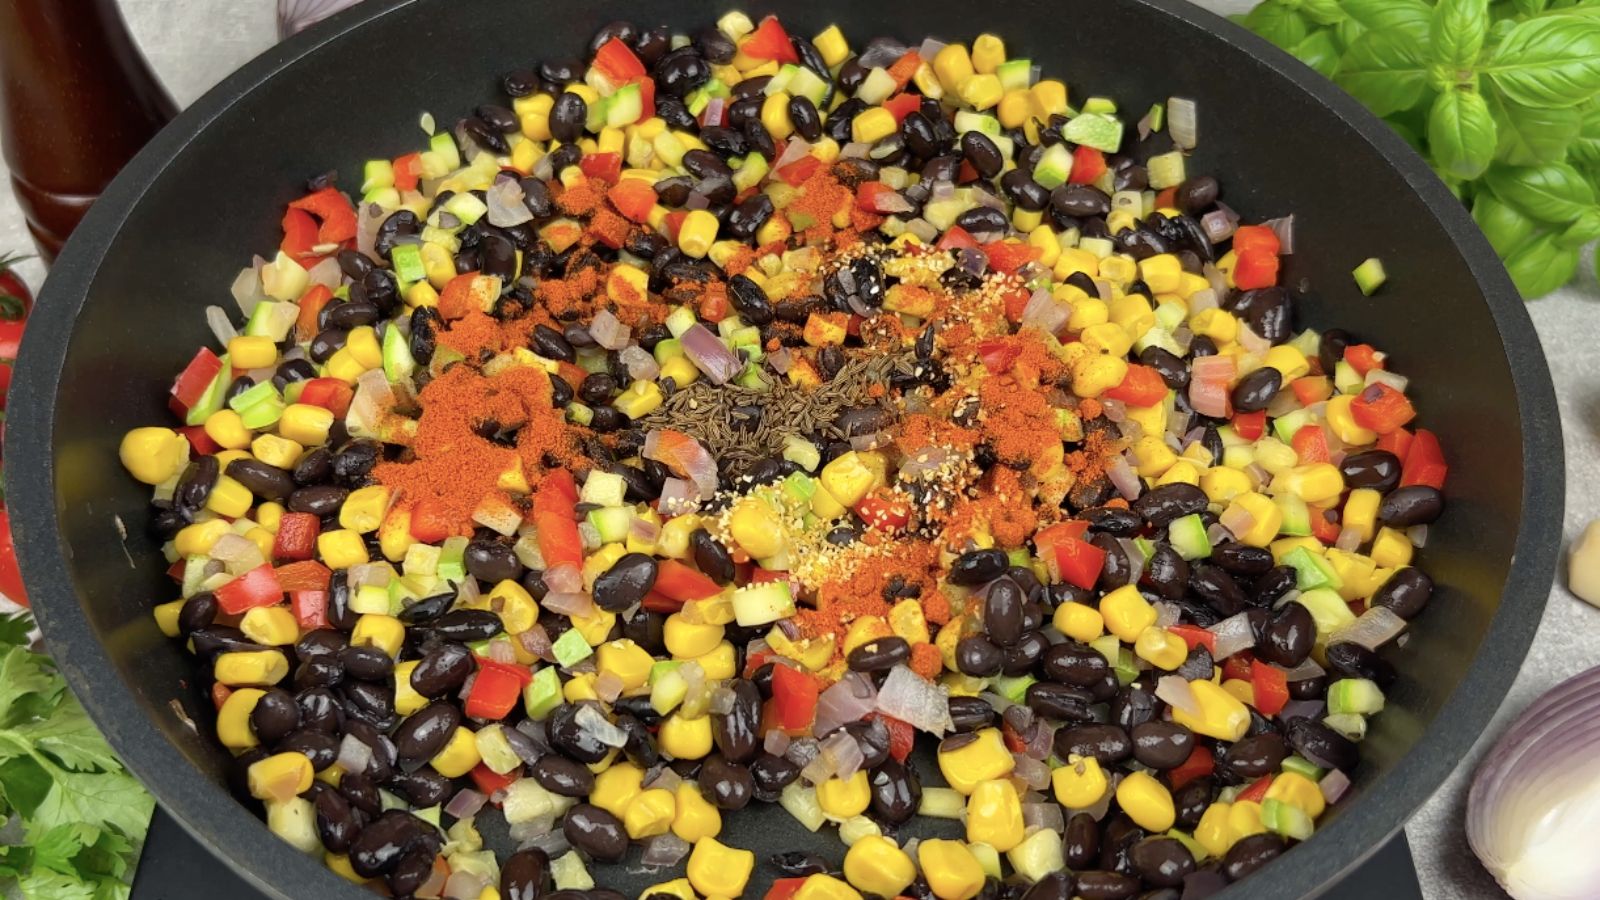 Black beans, corn, and vegetables in skillet with seasoning.
